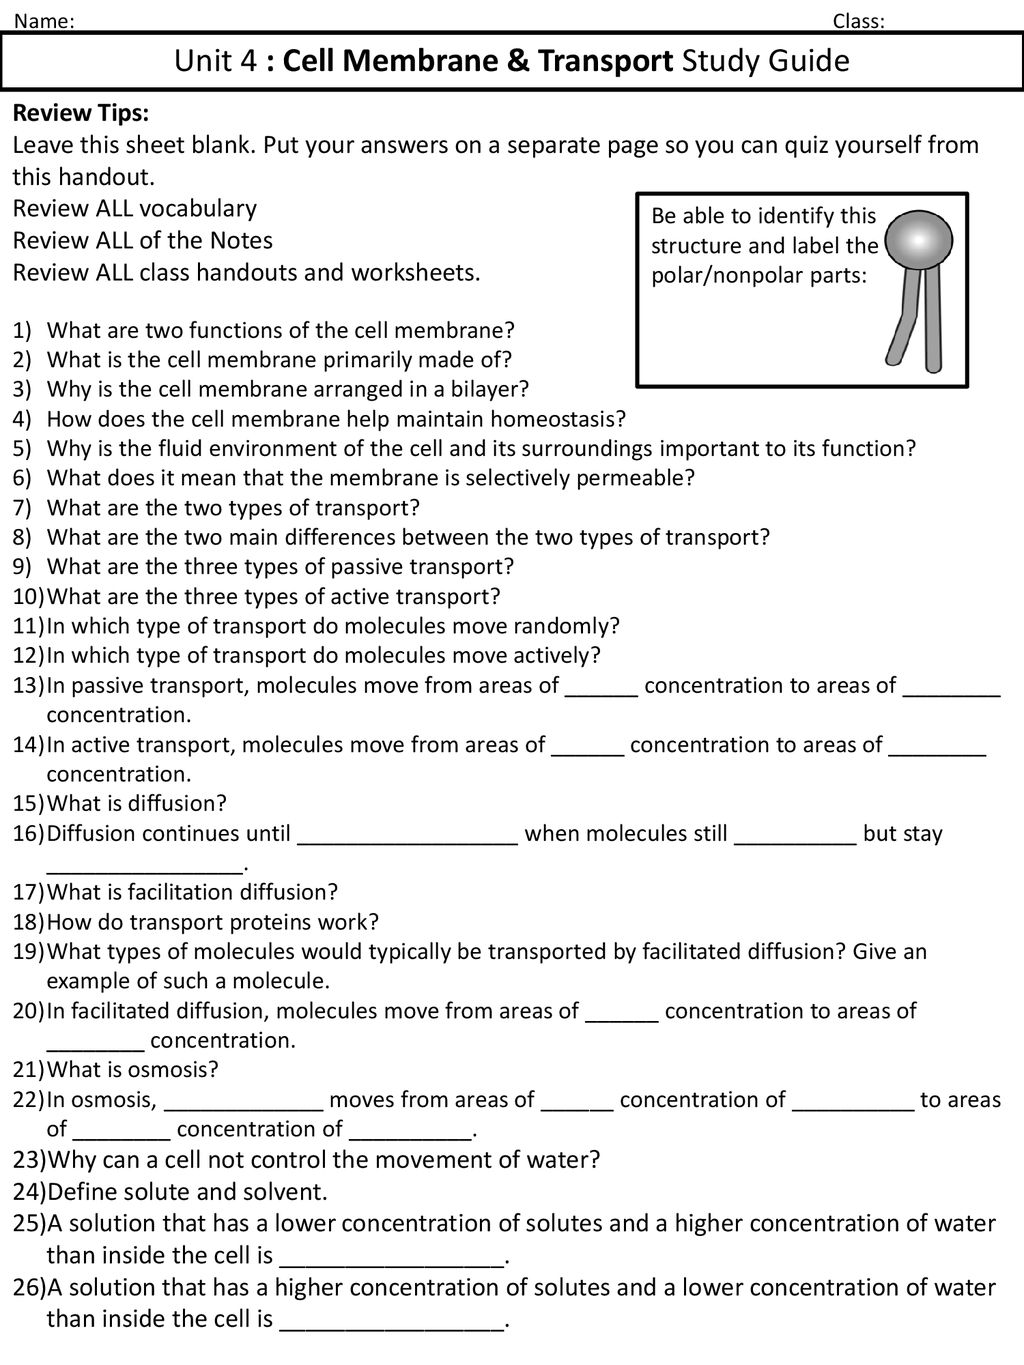 Unit 24 : Cell Membrane & Transport Study Guide - ppt download With Regard To Cell Transport Review Worksheet Answers